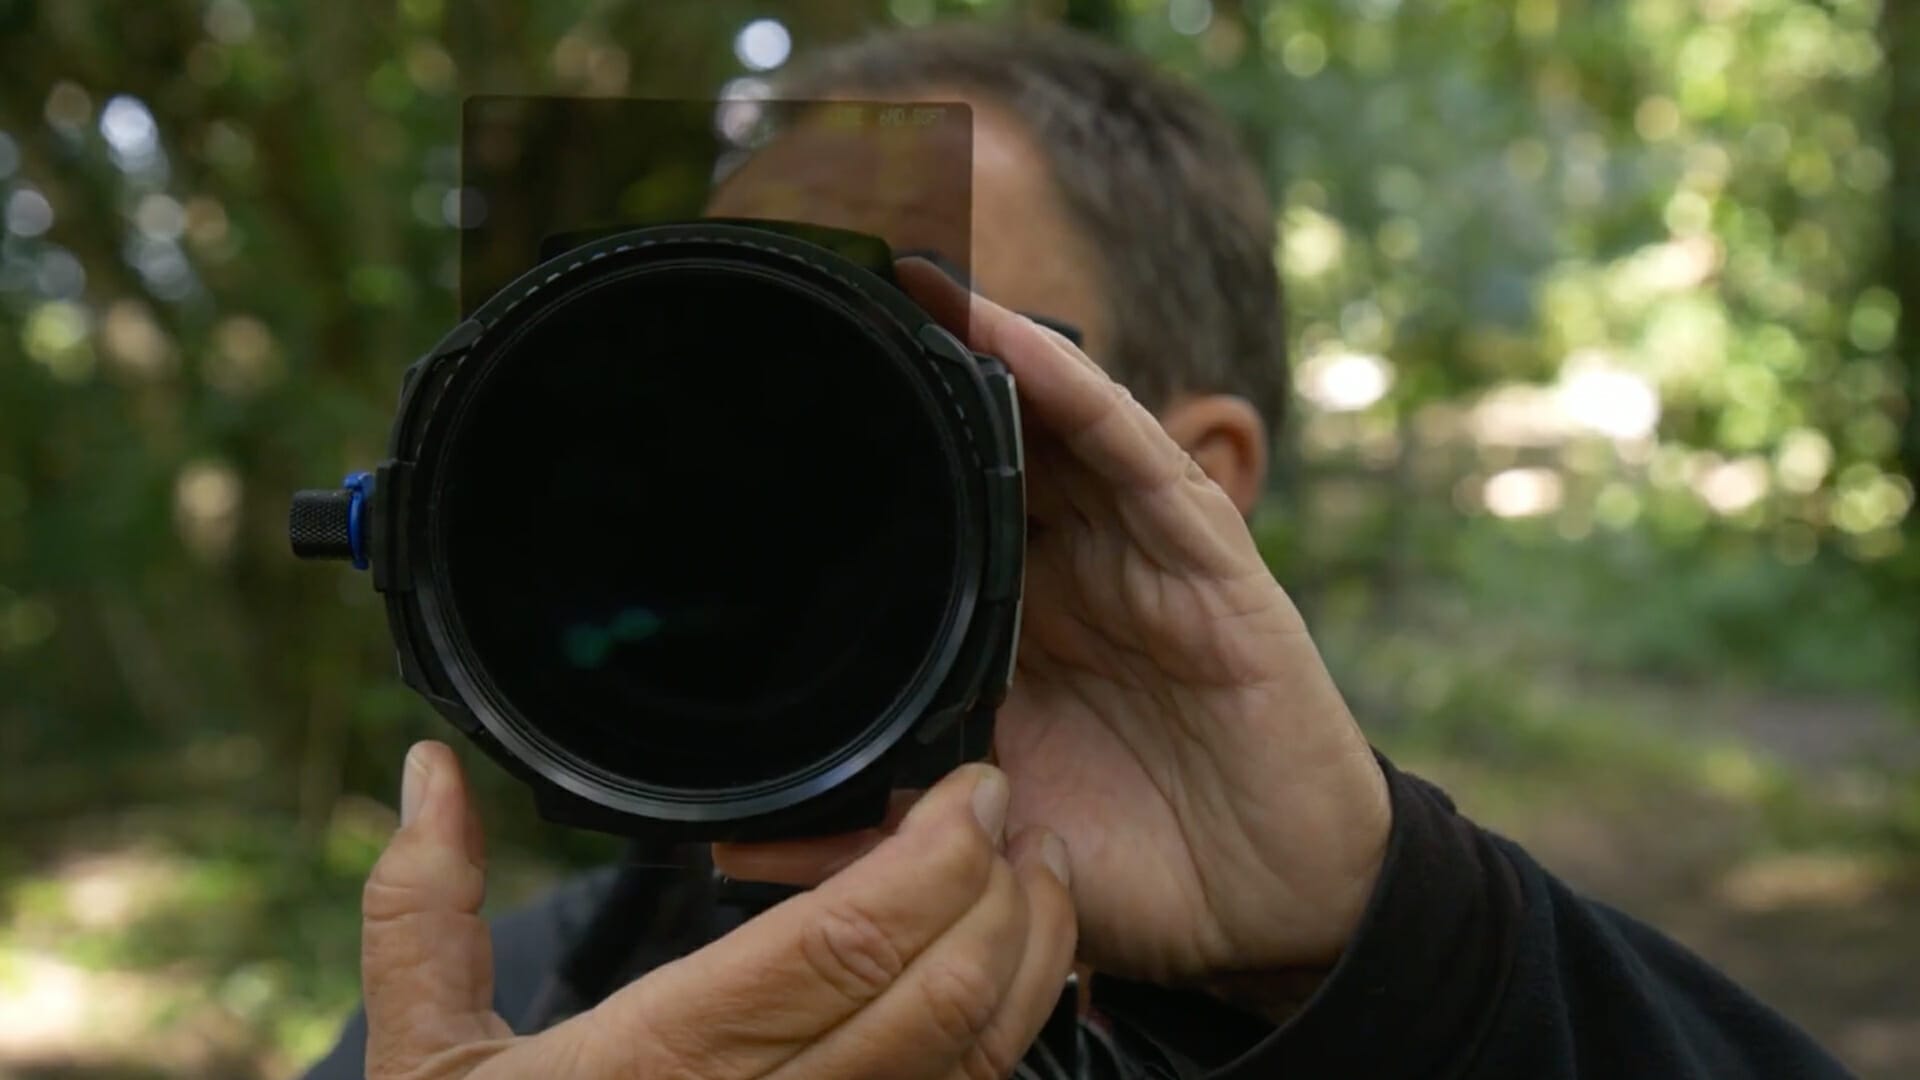 David Noton shoots with a Graduated ND filter